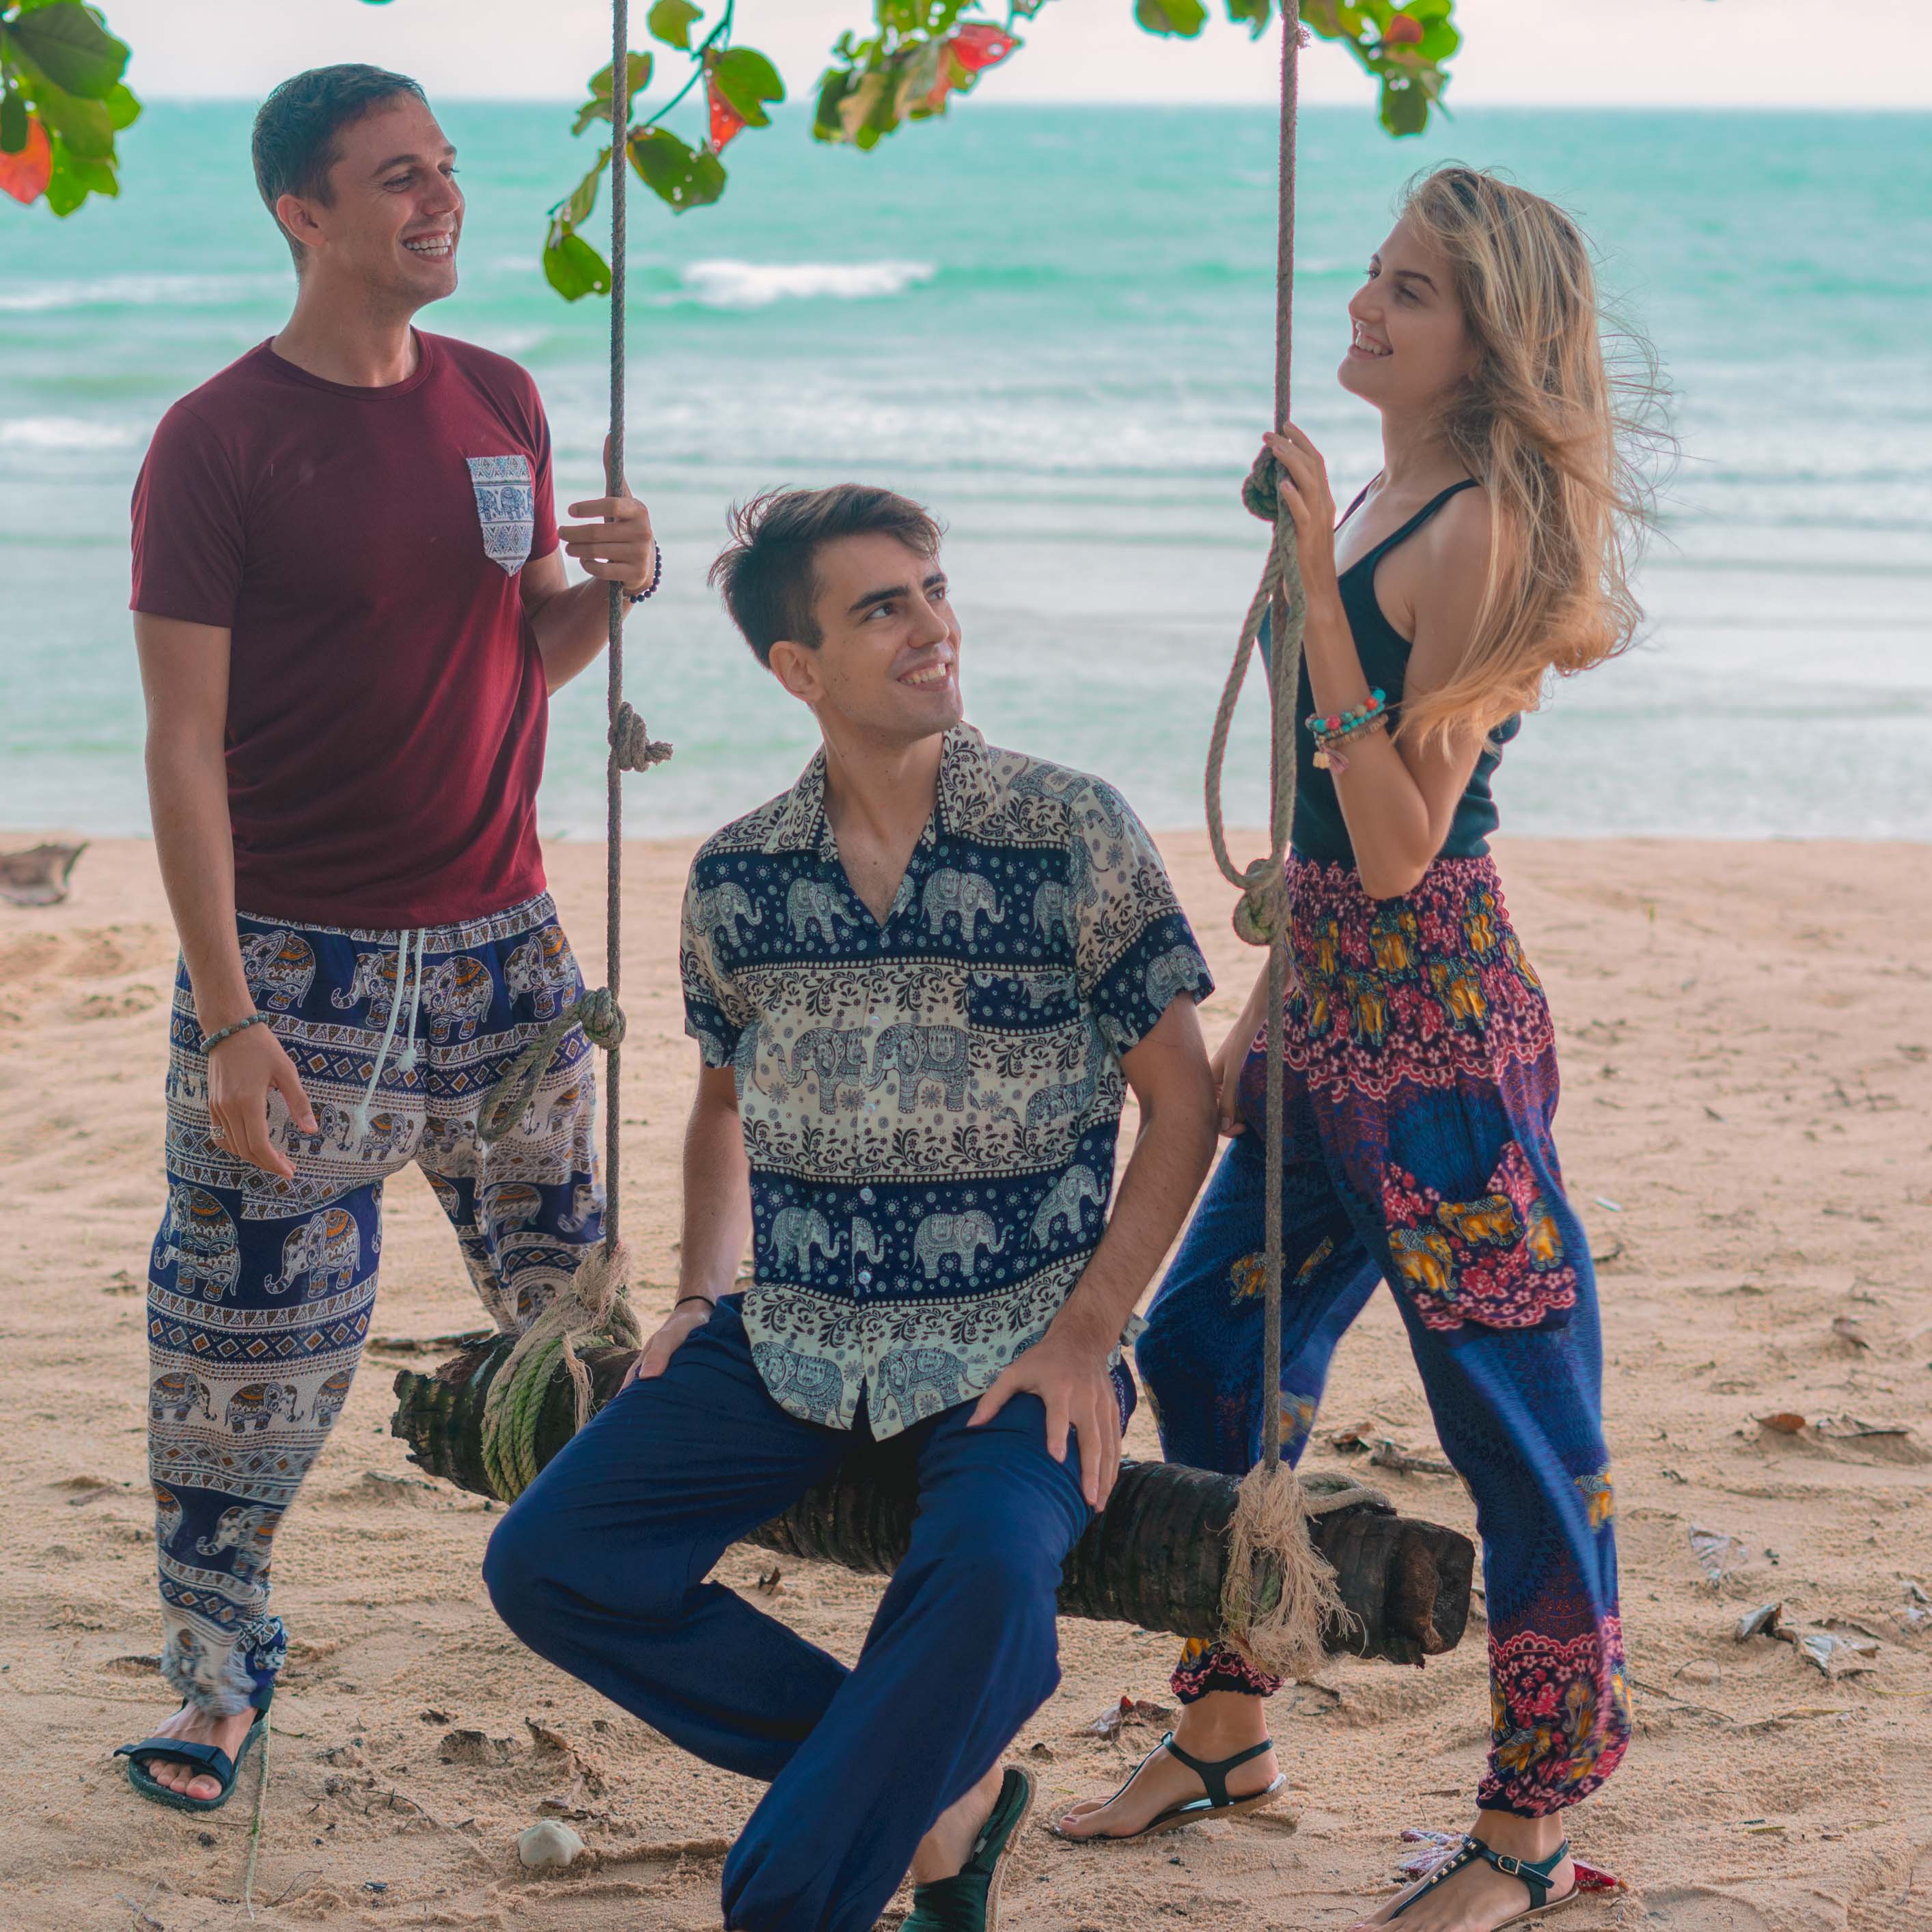 Angkor Pants Elepanta Men's Pants - Buy Today Elephant Pants Jewelry And Bohemian Clothes Handmade In Thailand Help To Save The Elephants FairTrade And Vegan